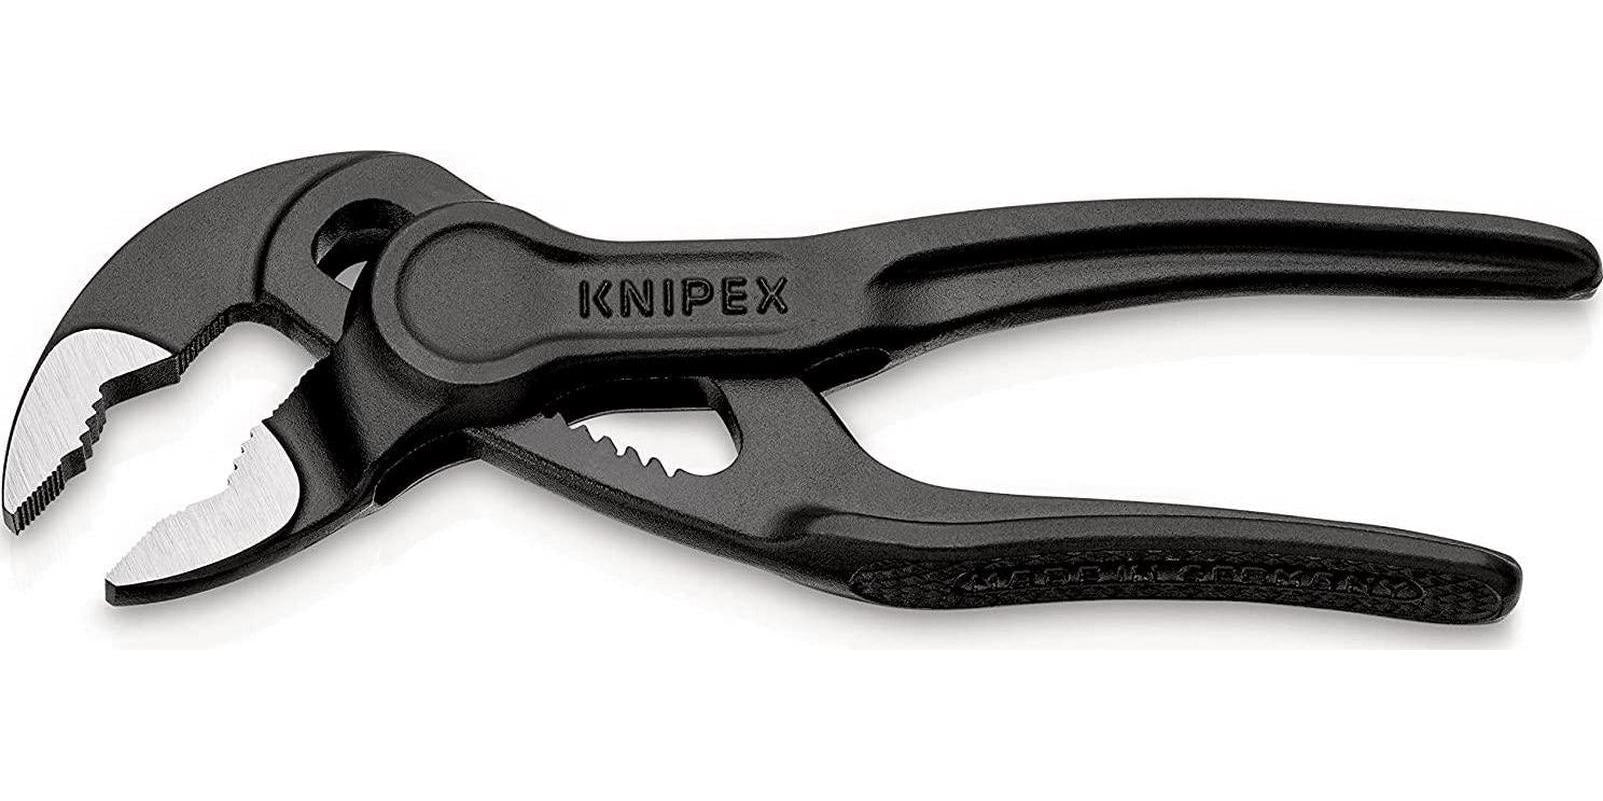 KNIPEX, KNIPEX Cobra XS Pipe Wrench and Water Pump Pliers (100 mm) 87 00 100